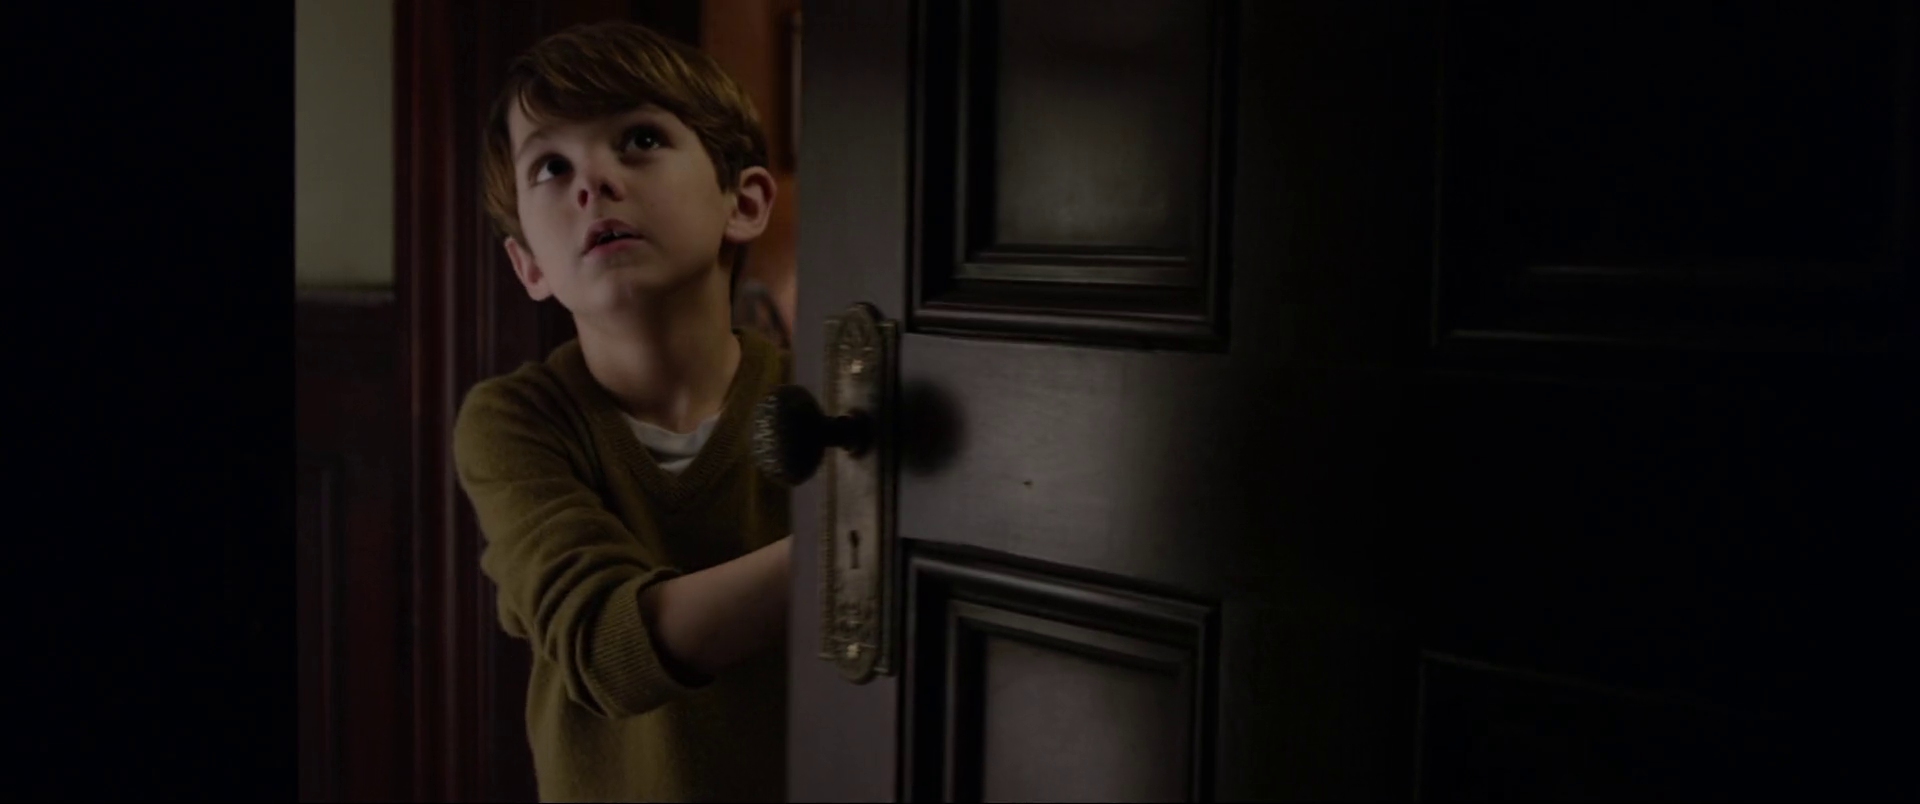 Max Charles in The Amazing Spider-Man